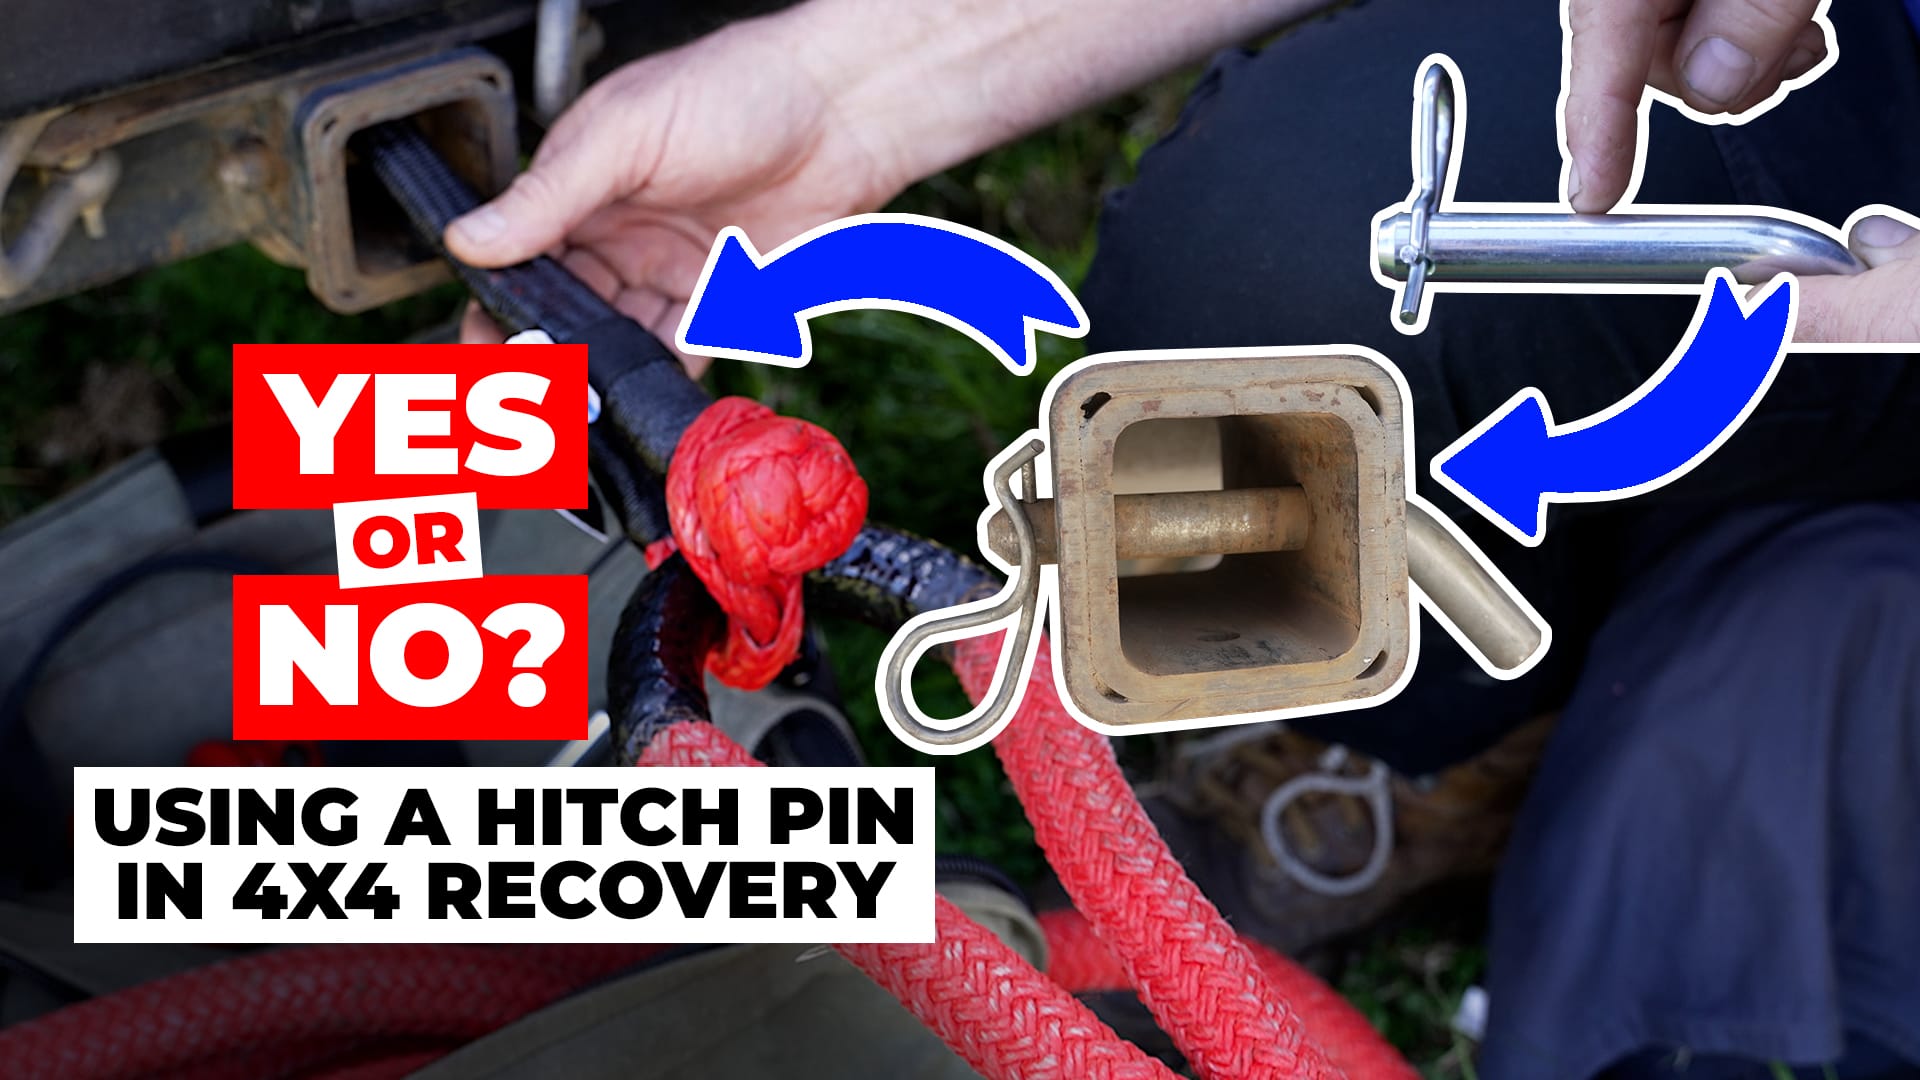 Should you use a hitch pin as a 4x4 recovery device?